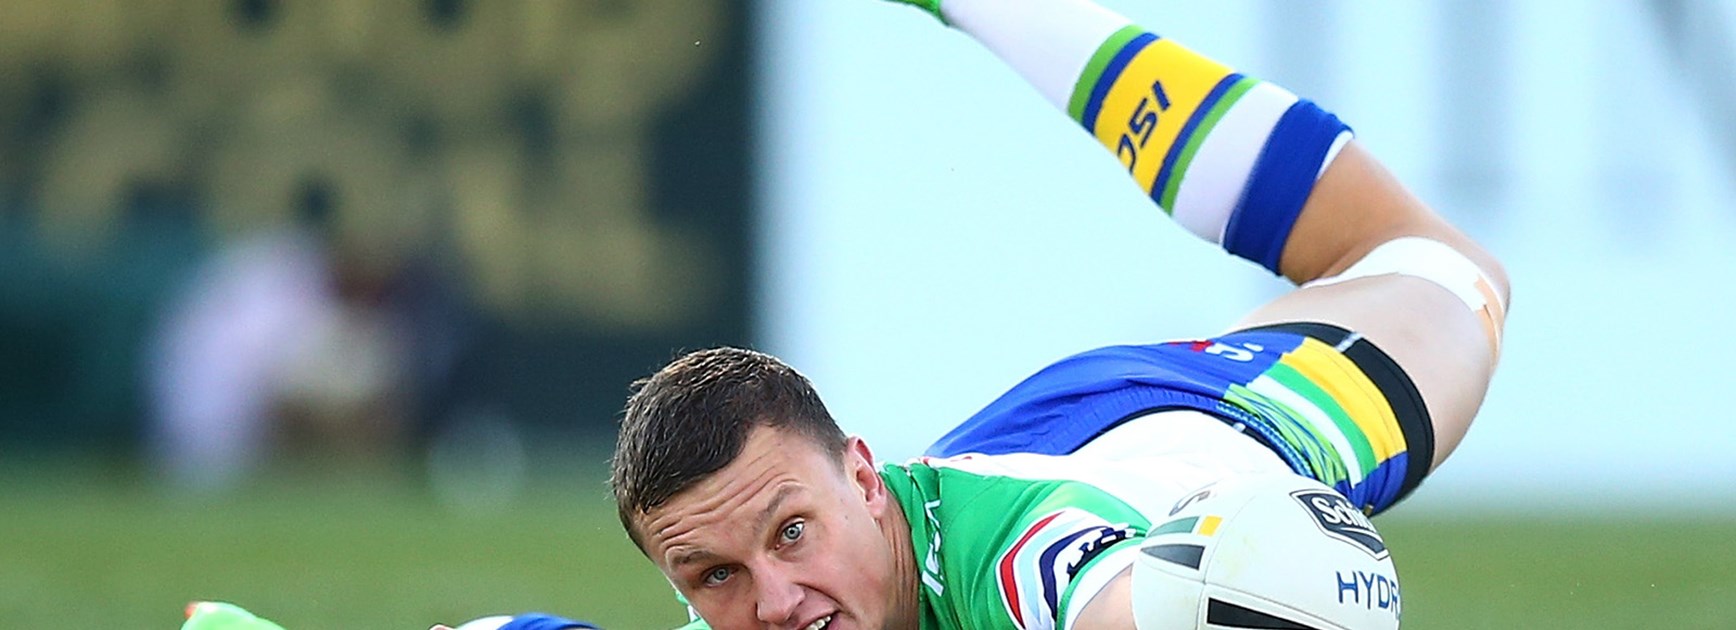 Jack Wighton made several early errors, but made amends with a match turning play.